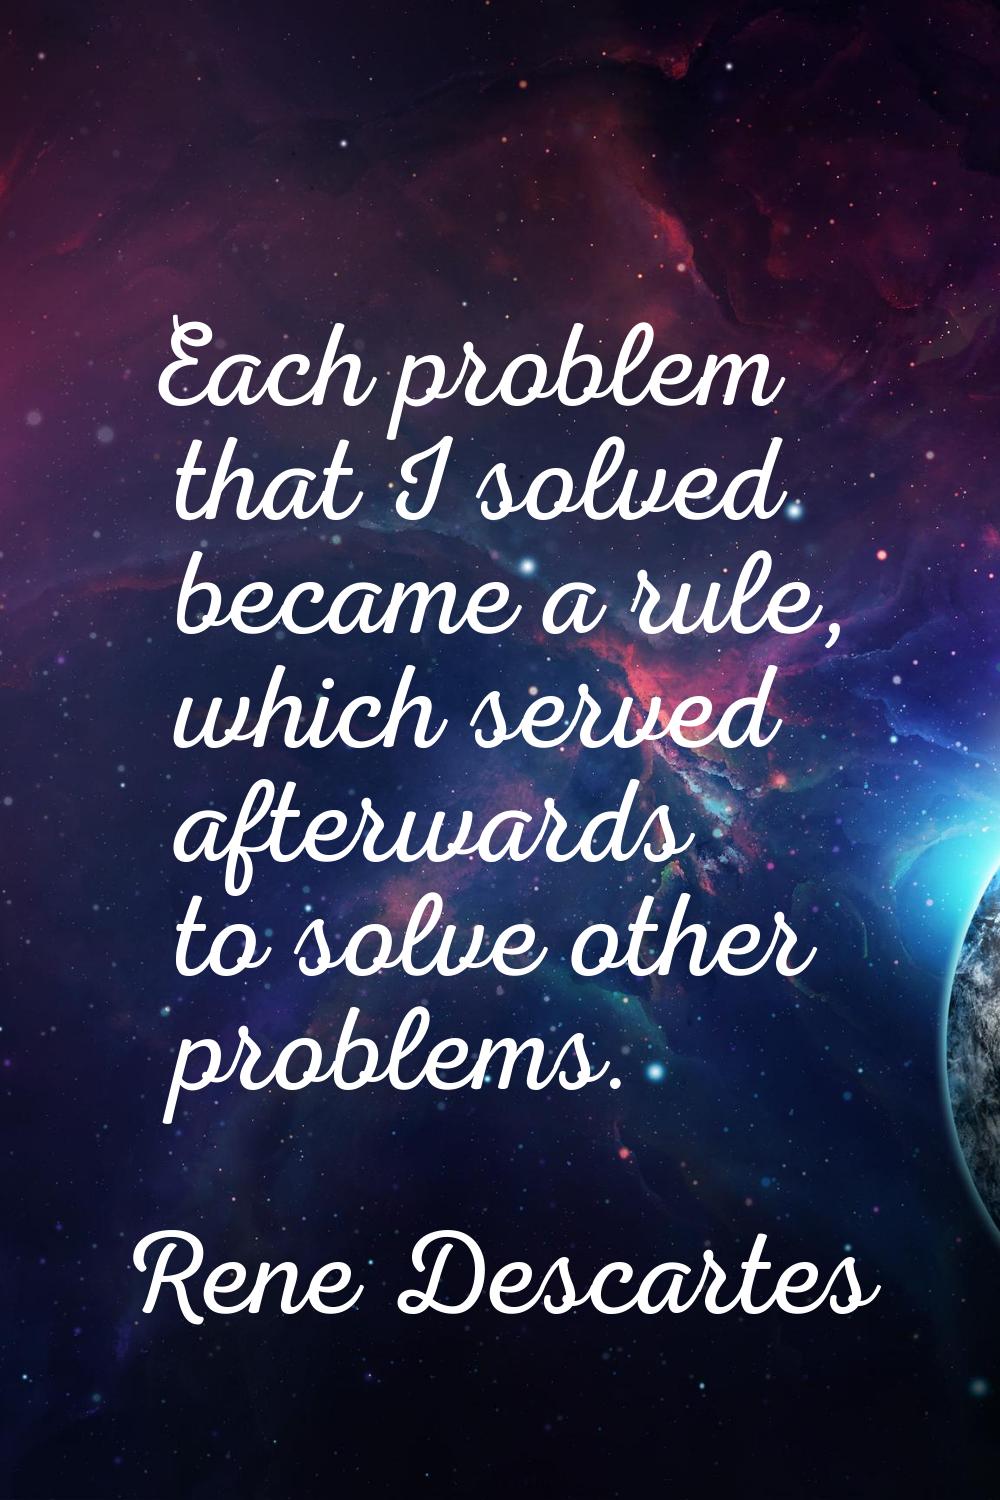 Each problem that I solved became a rule, which served afterwards to solve other problems.